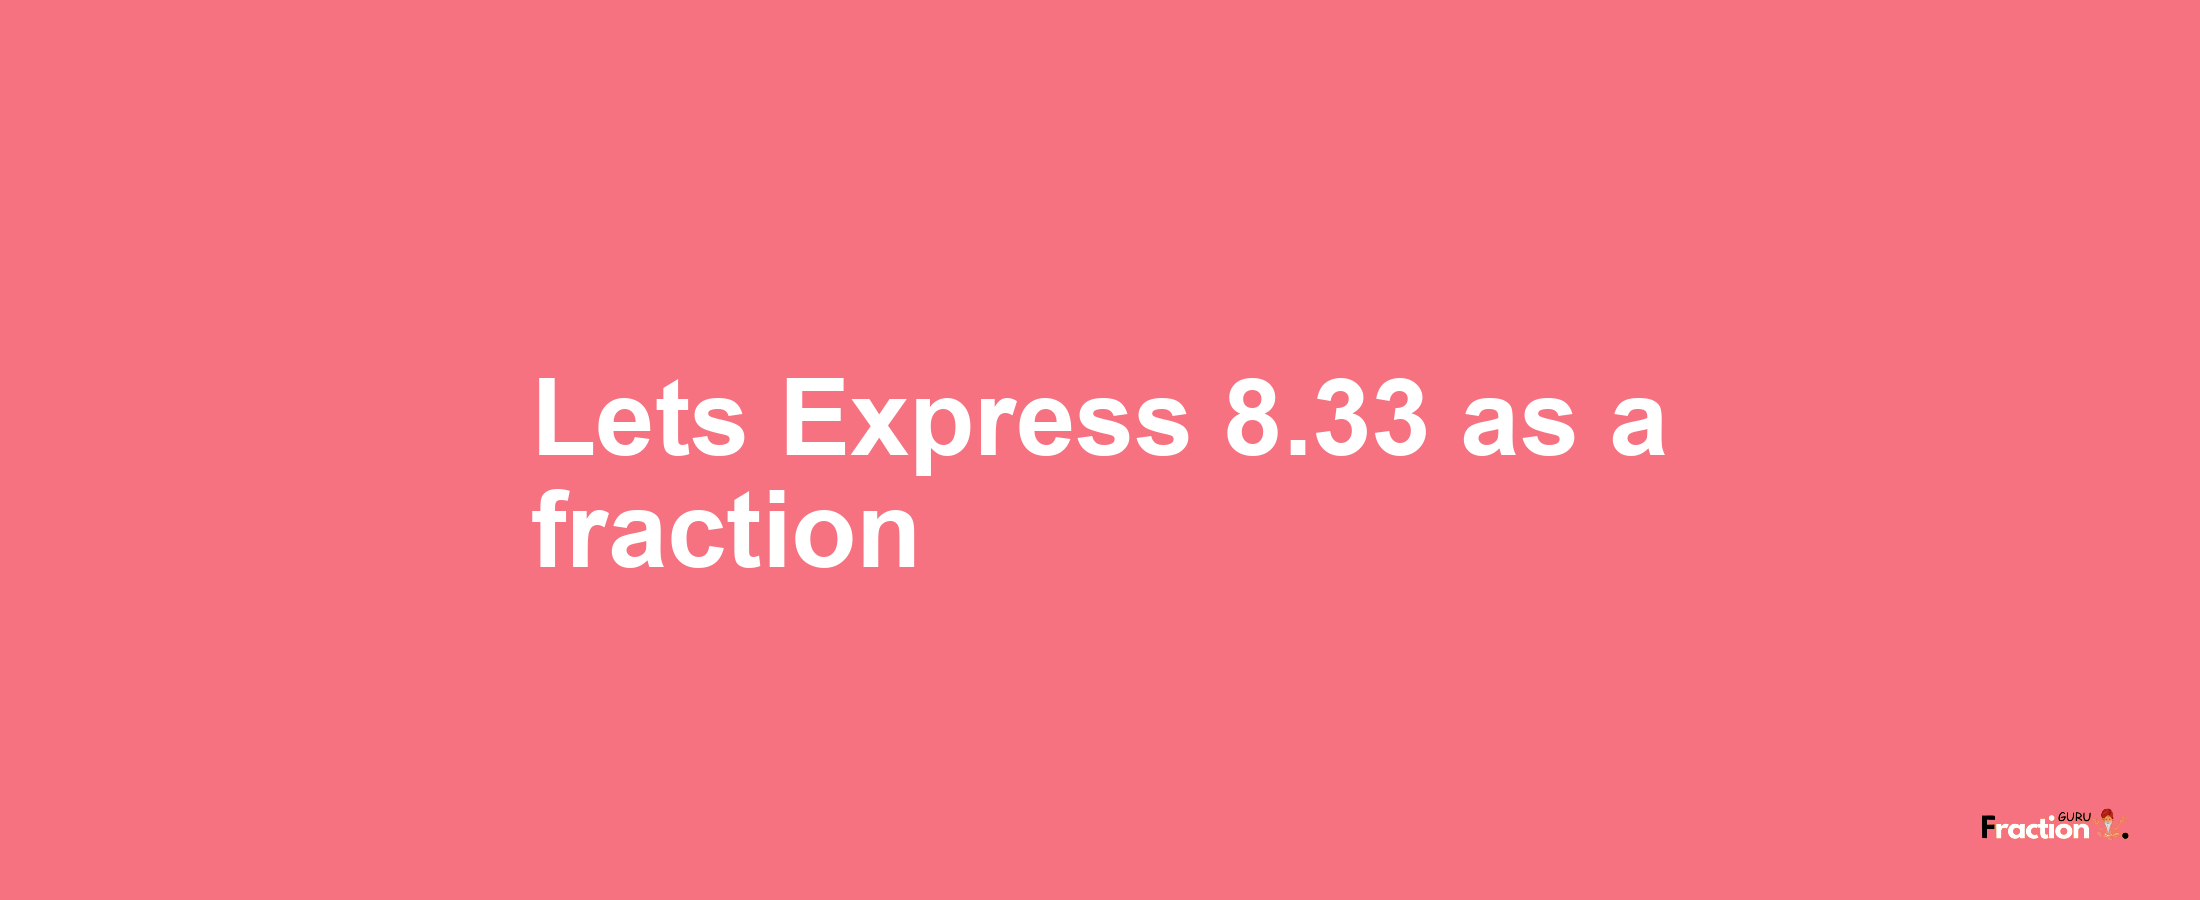 Lets Express 8.33 as afraction